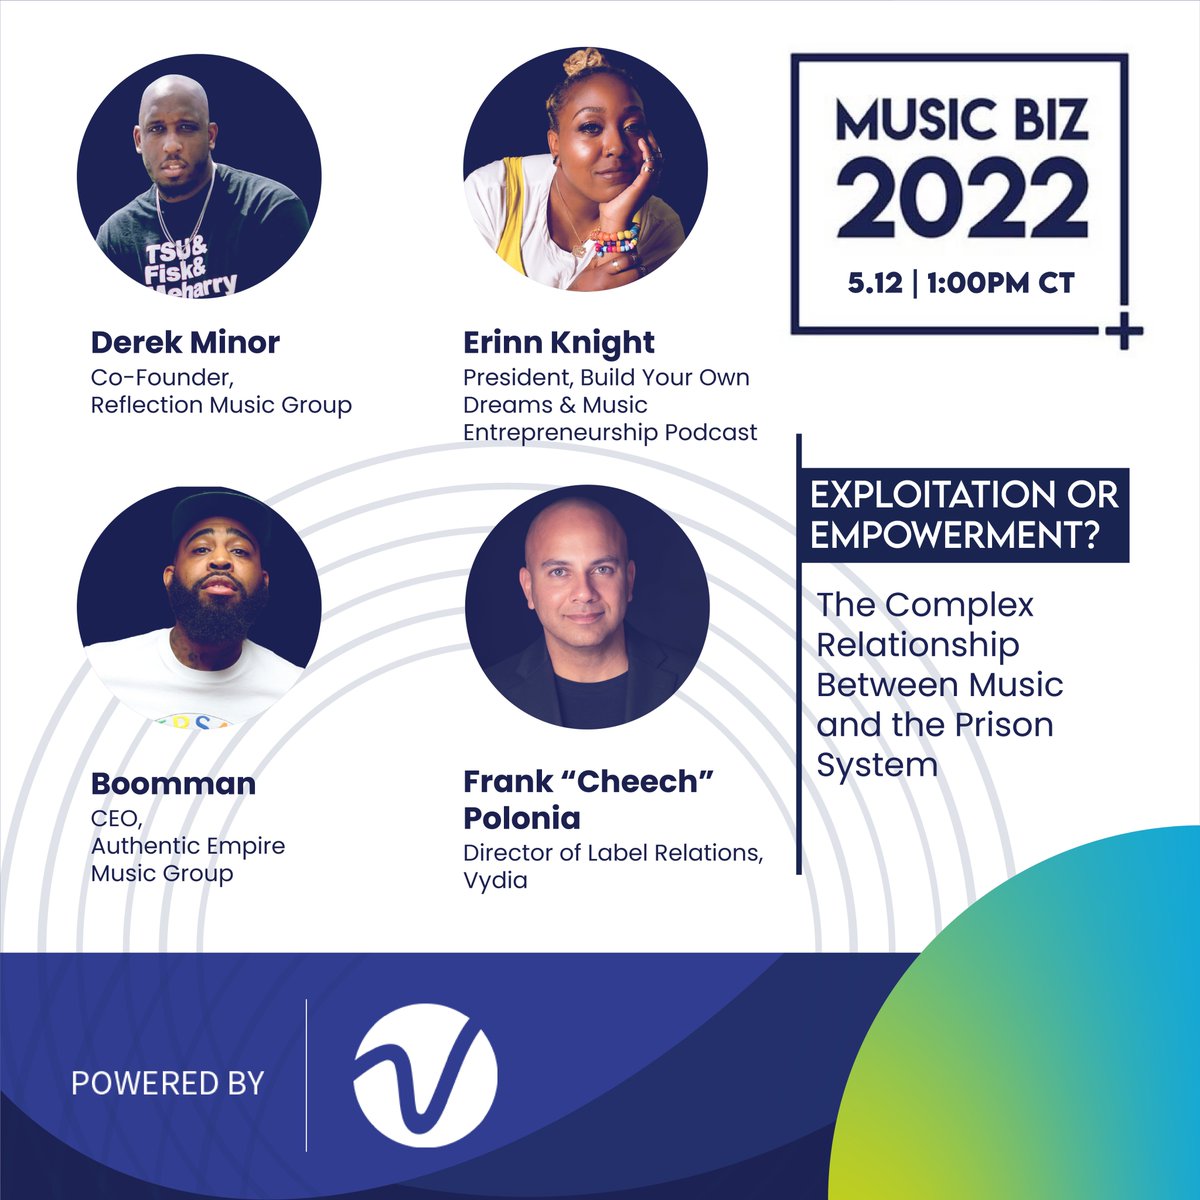 Join us at #MusicBiz2022 for our panel discussion, Exploitation or Empowerment? The Complex Relationship Between Music and the Prison System. Secure your seat here: registration.socio.events/e/mb22